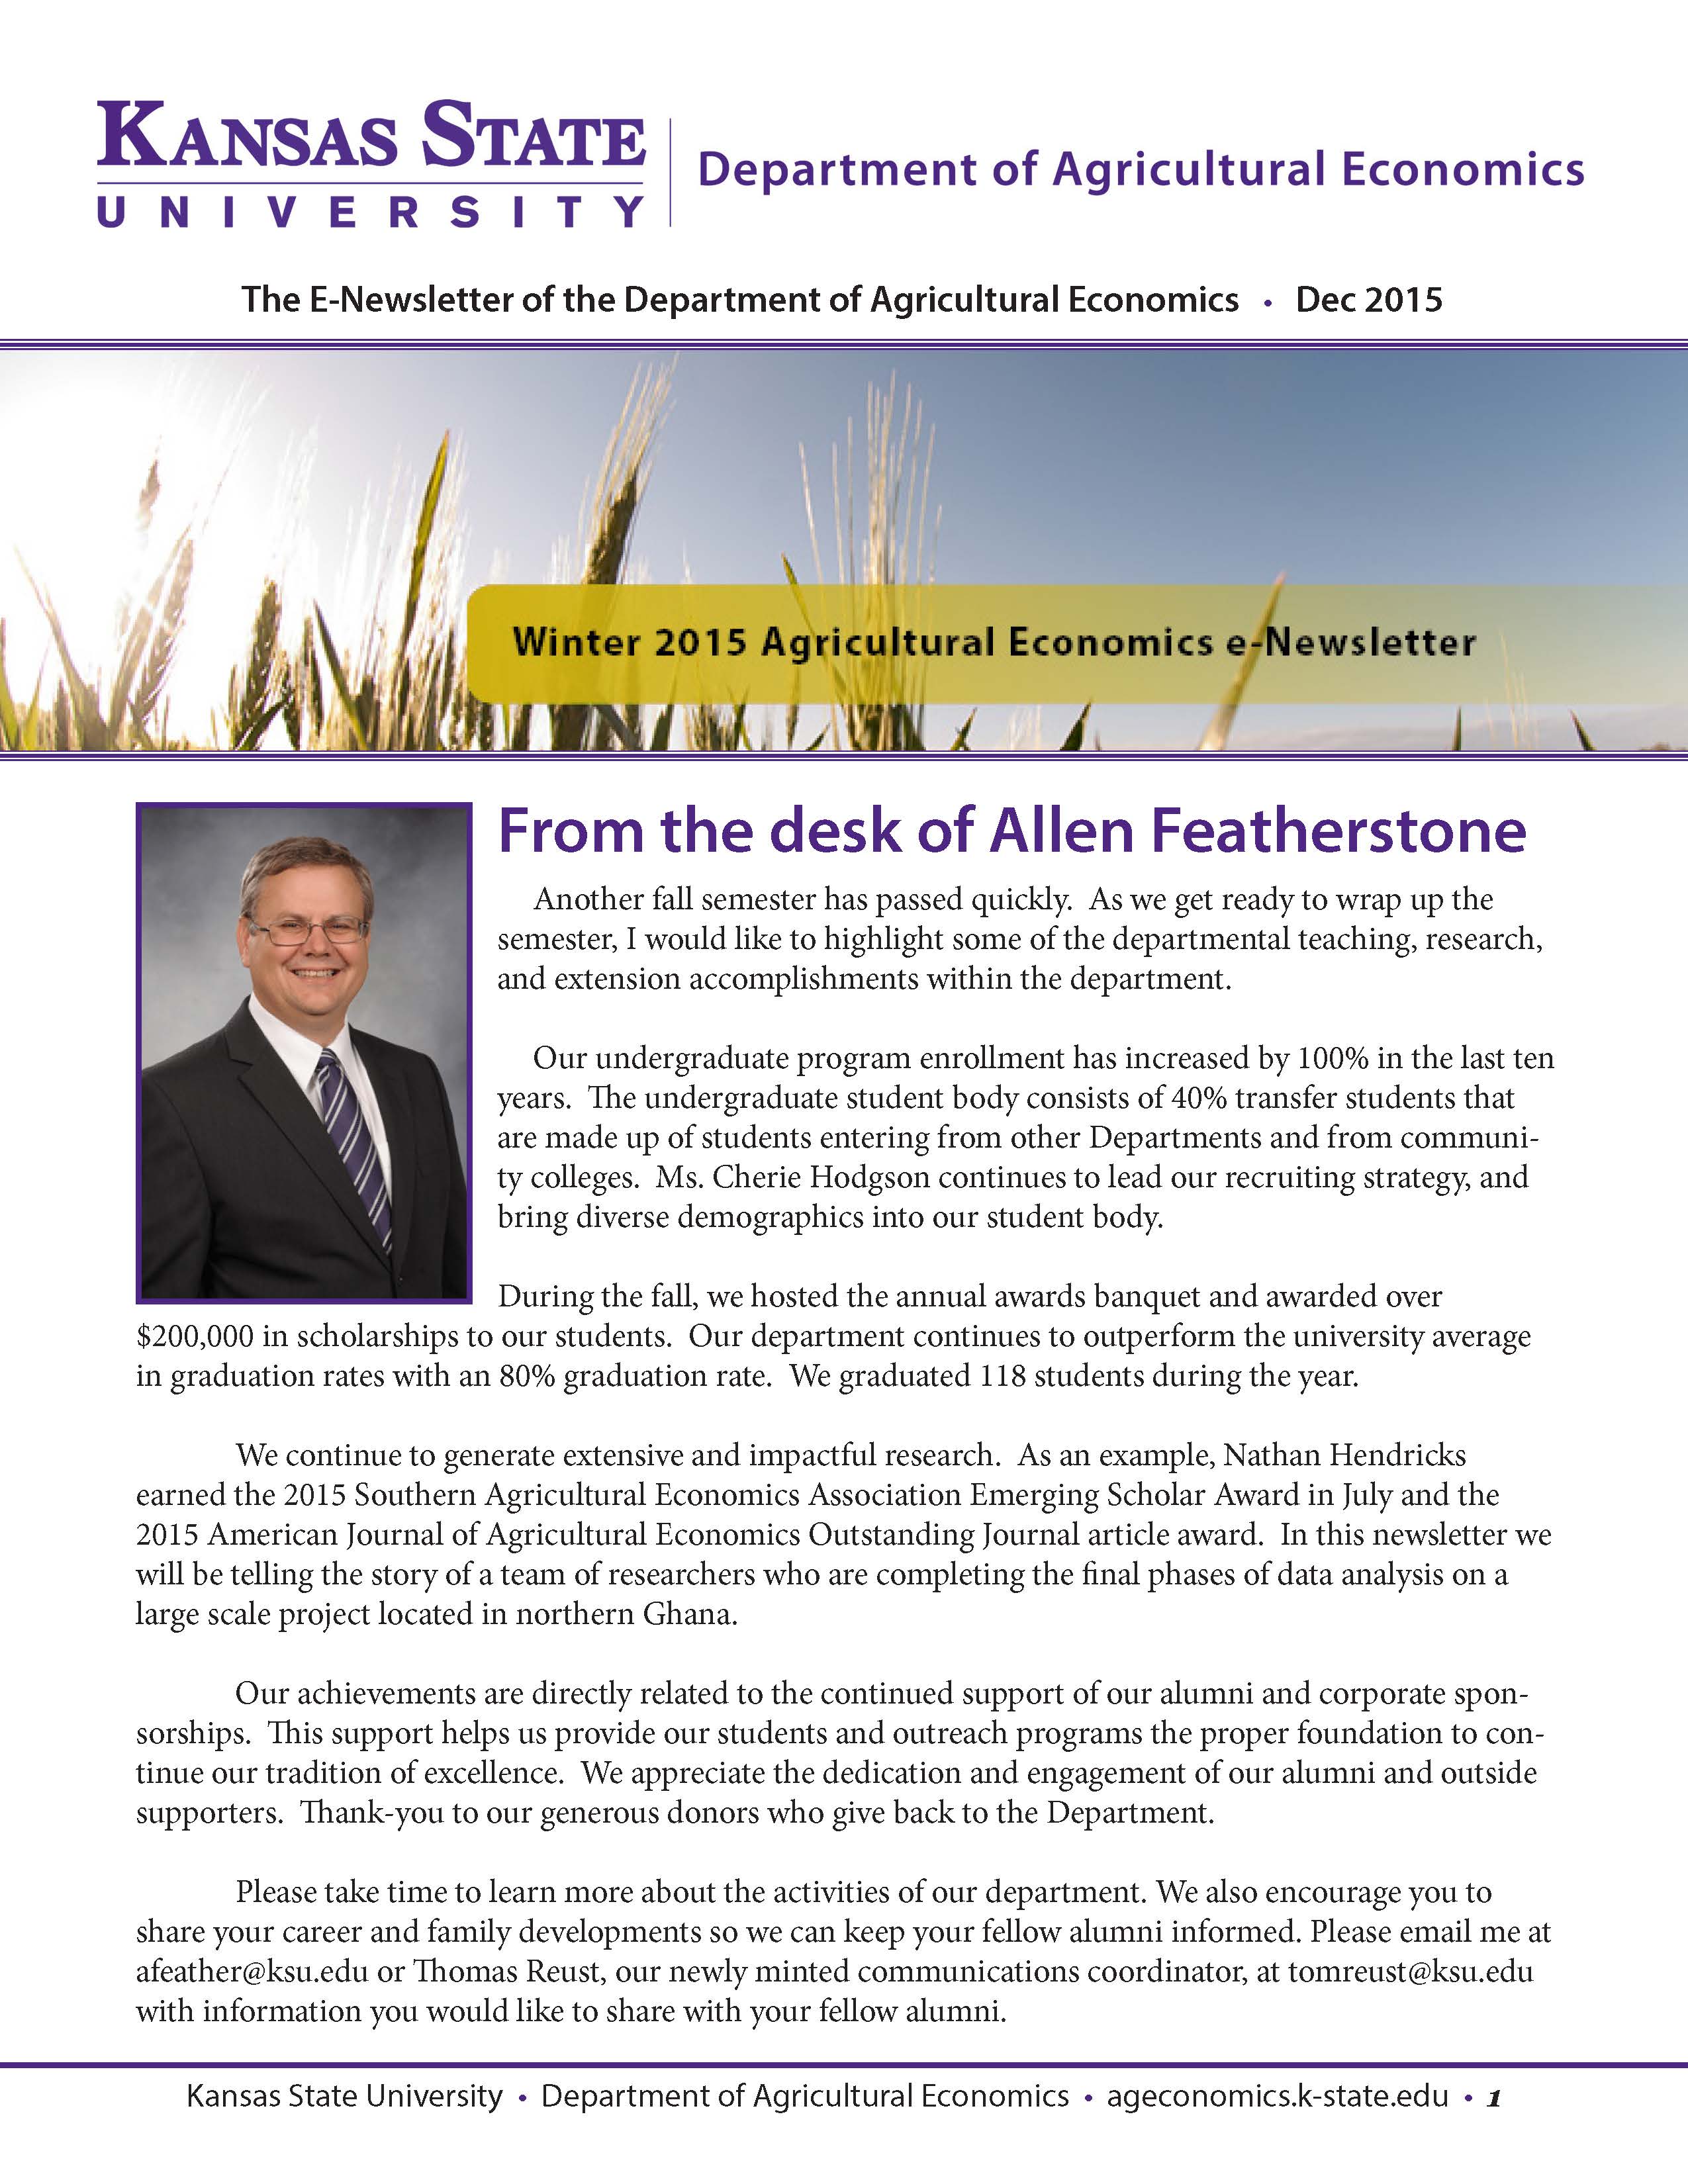 Dissertation In Agricultural Economics : Top dissertation writing service & help